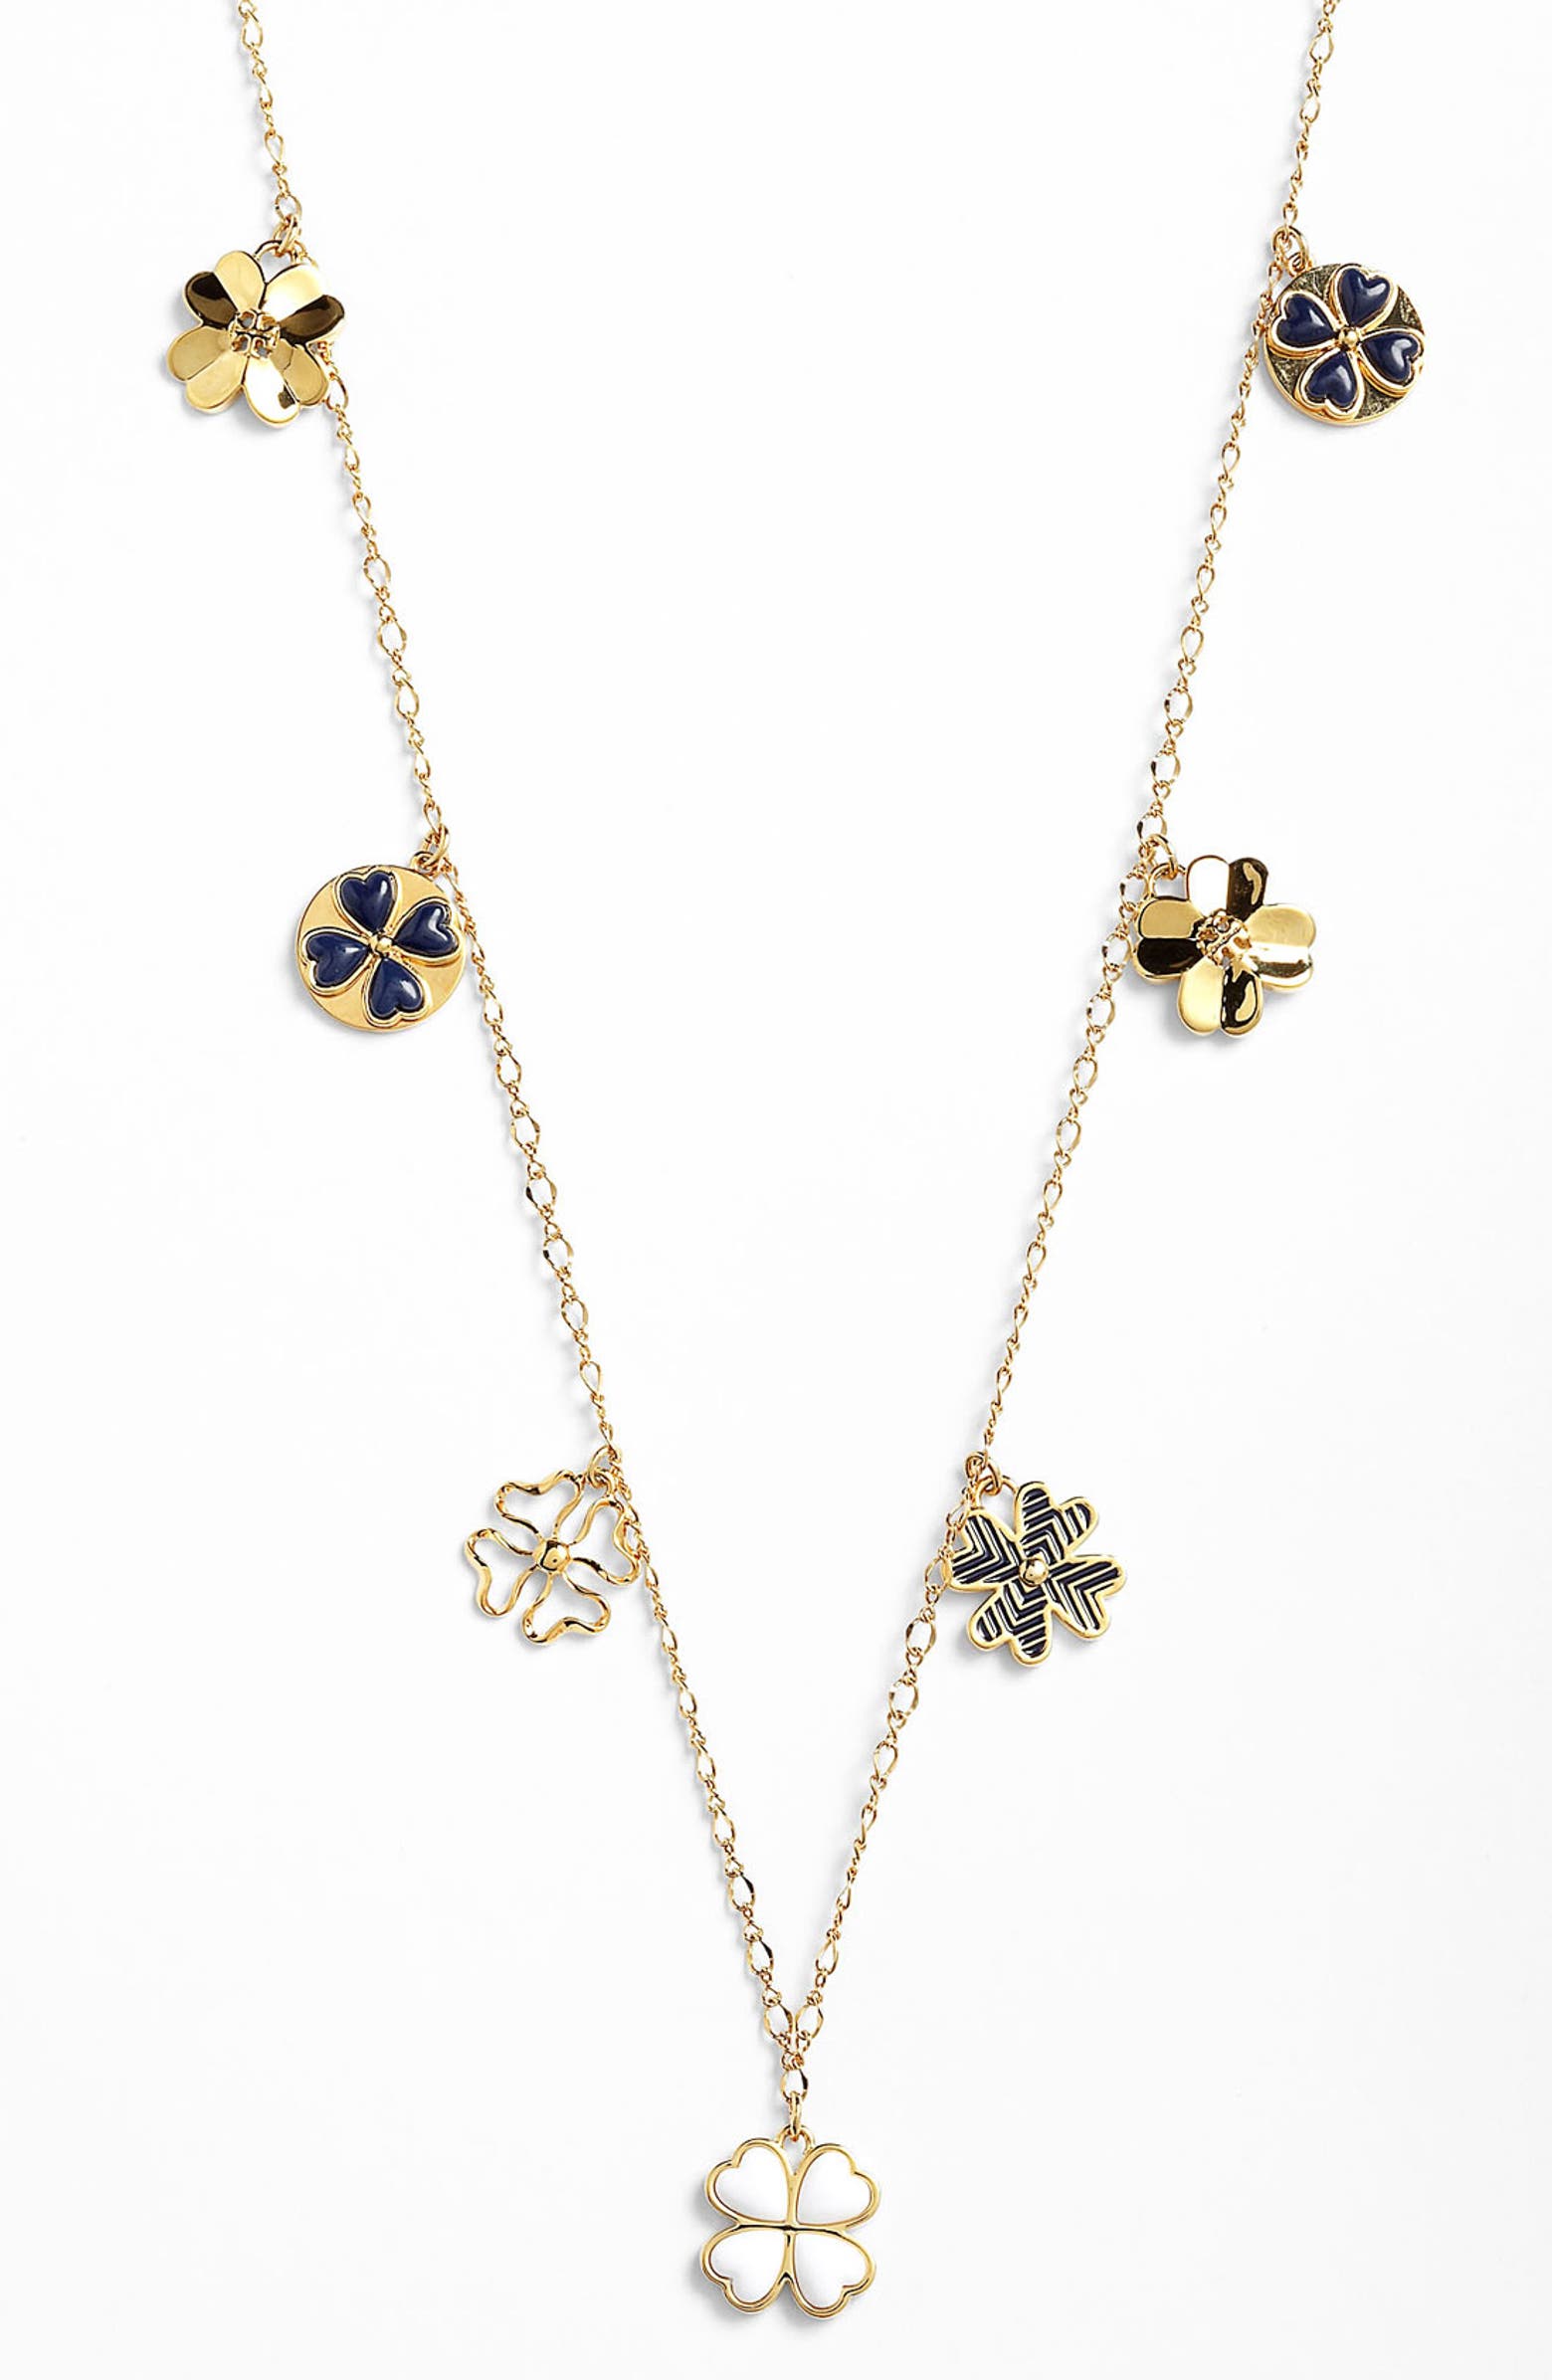 Tory Burch 'Shawn' Long Station Necklace Nordstrom